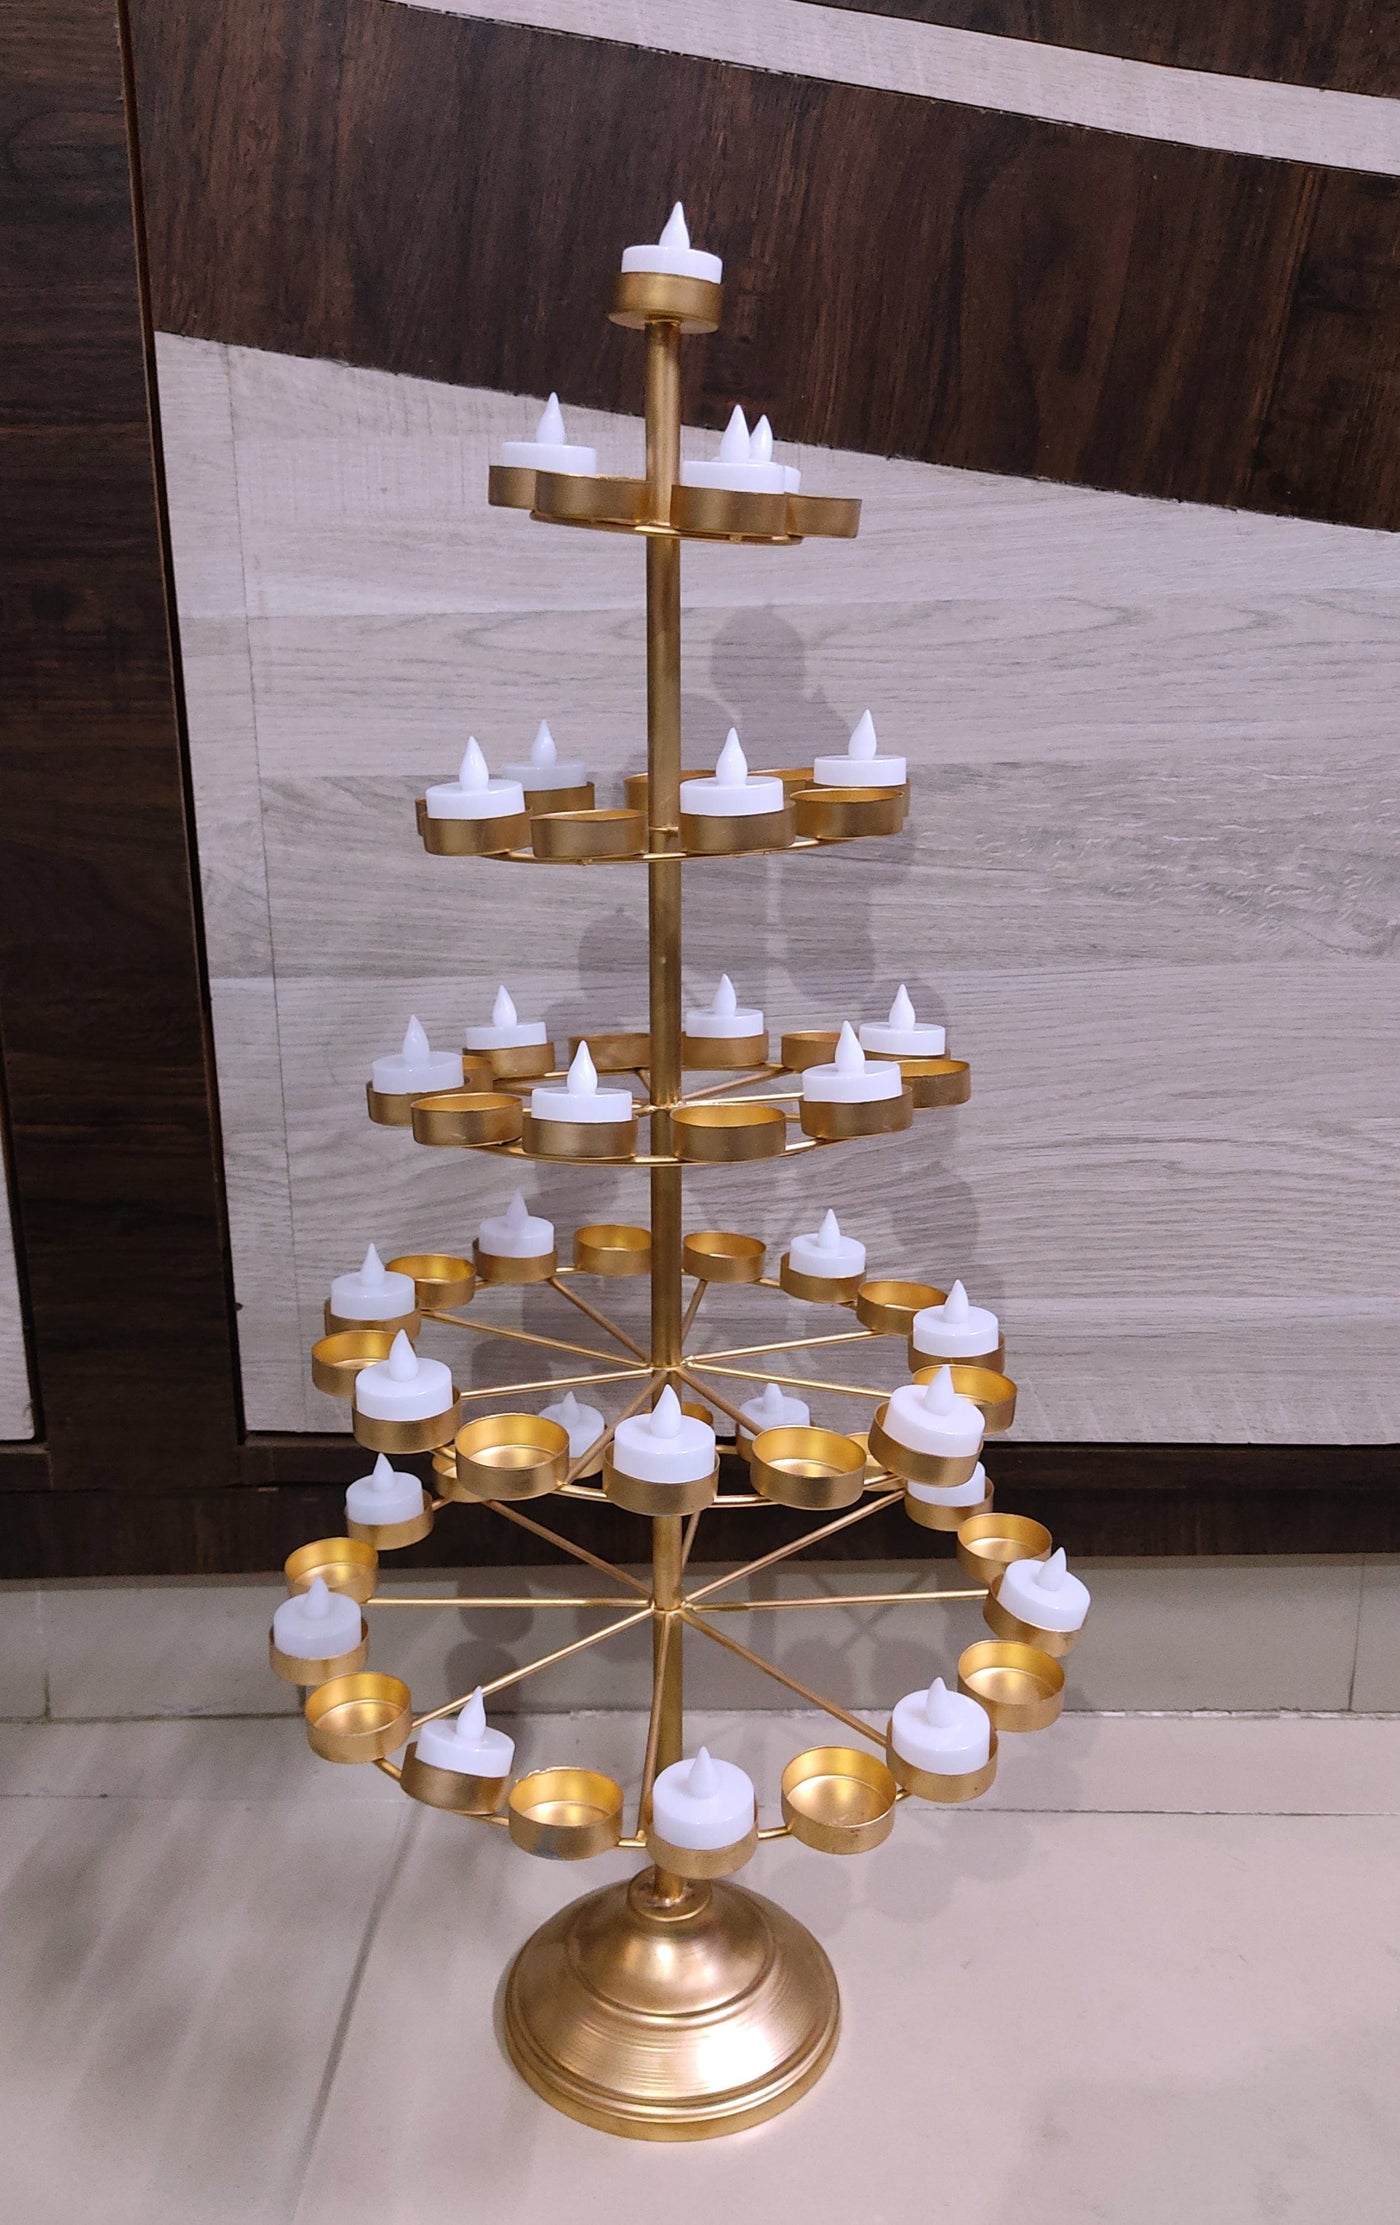 LAMANSH diya stand Golden LAMANSH® 2 ft Height 6 Layer Candles 🕯 Diya Stand for Event Dancing 💃 Props Usage & Festival , Diwali Decoration / Golden Metal Diya Candle Holder with 60 Tealight for Bride & Groom entry / Perfect for indian wedding decoration